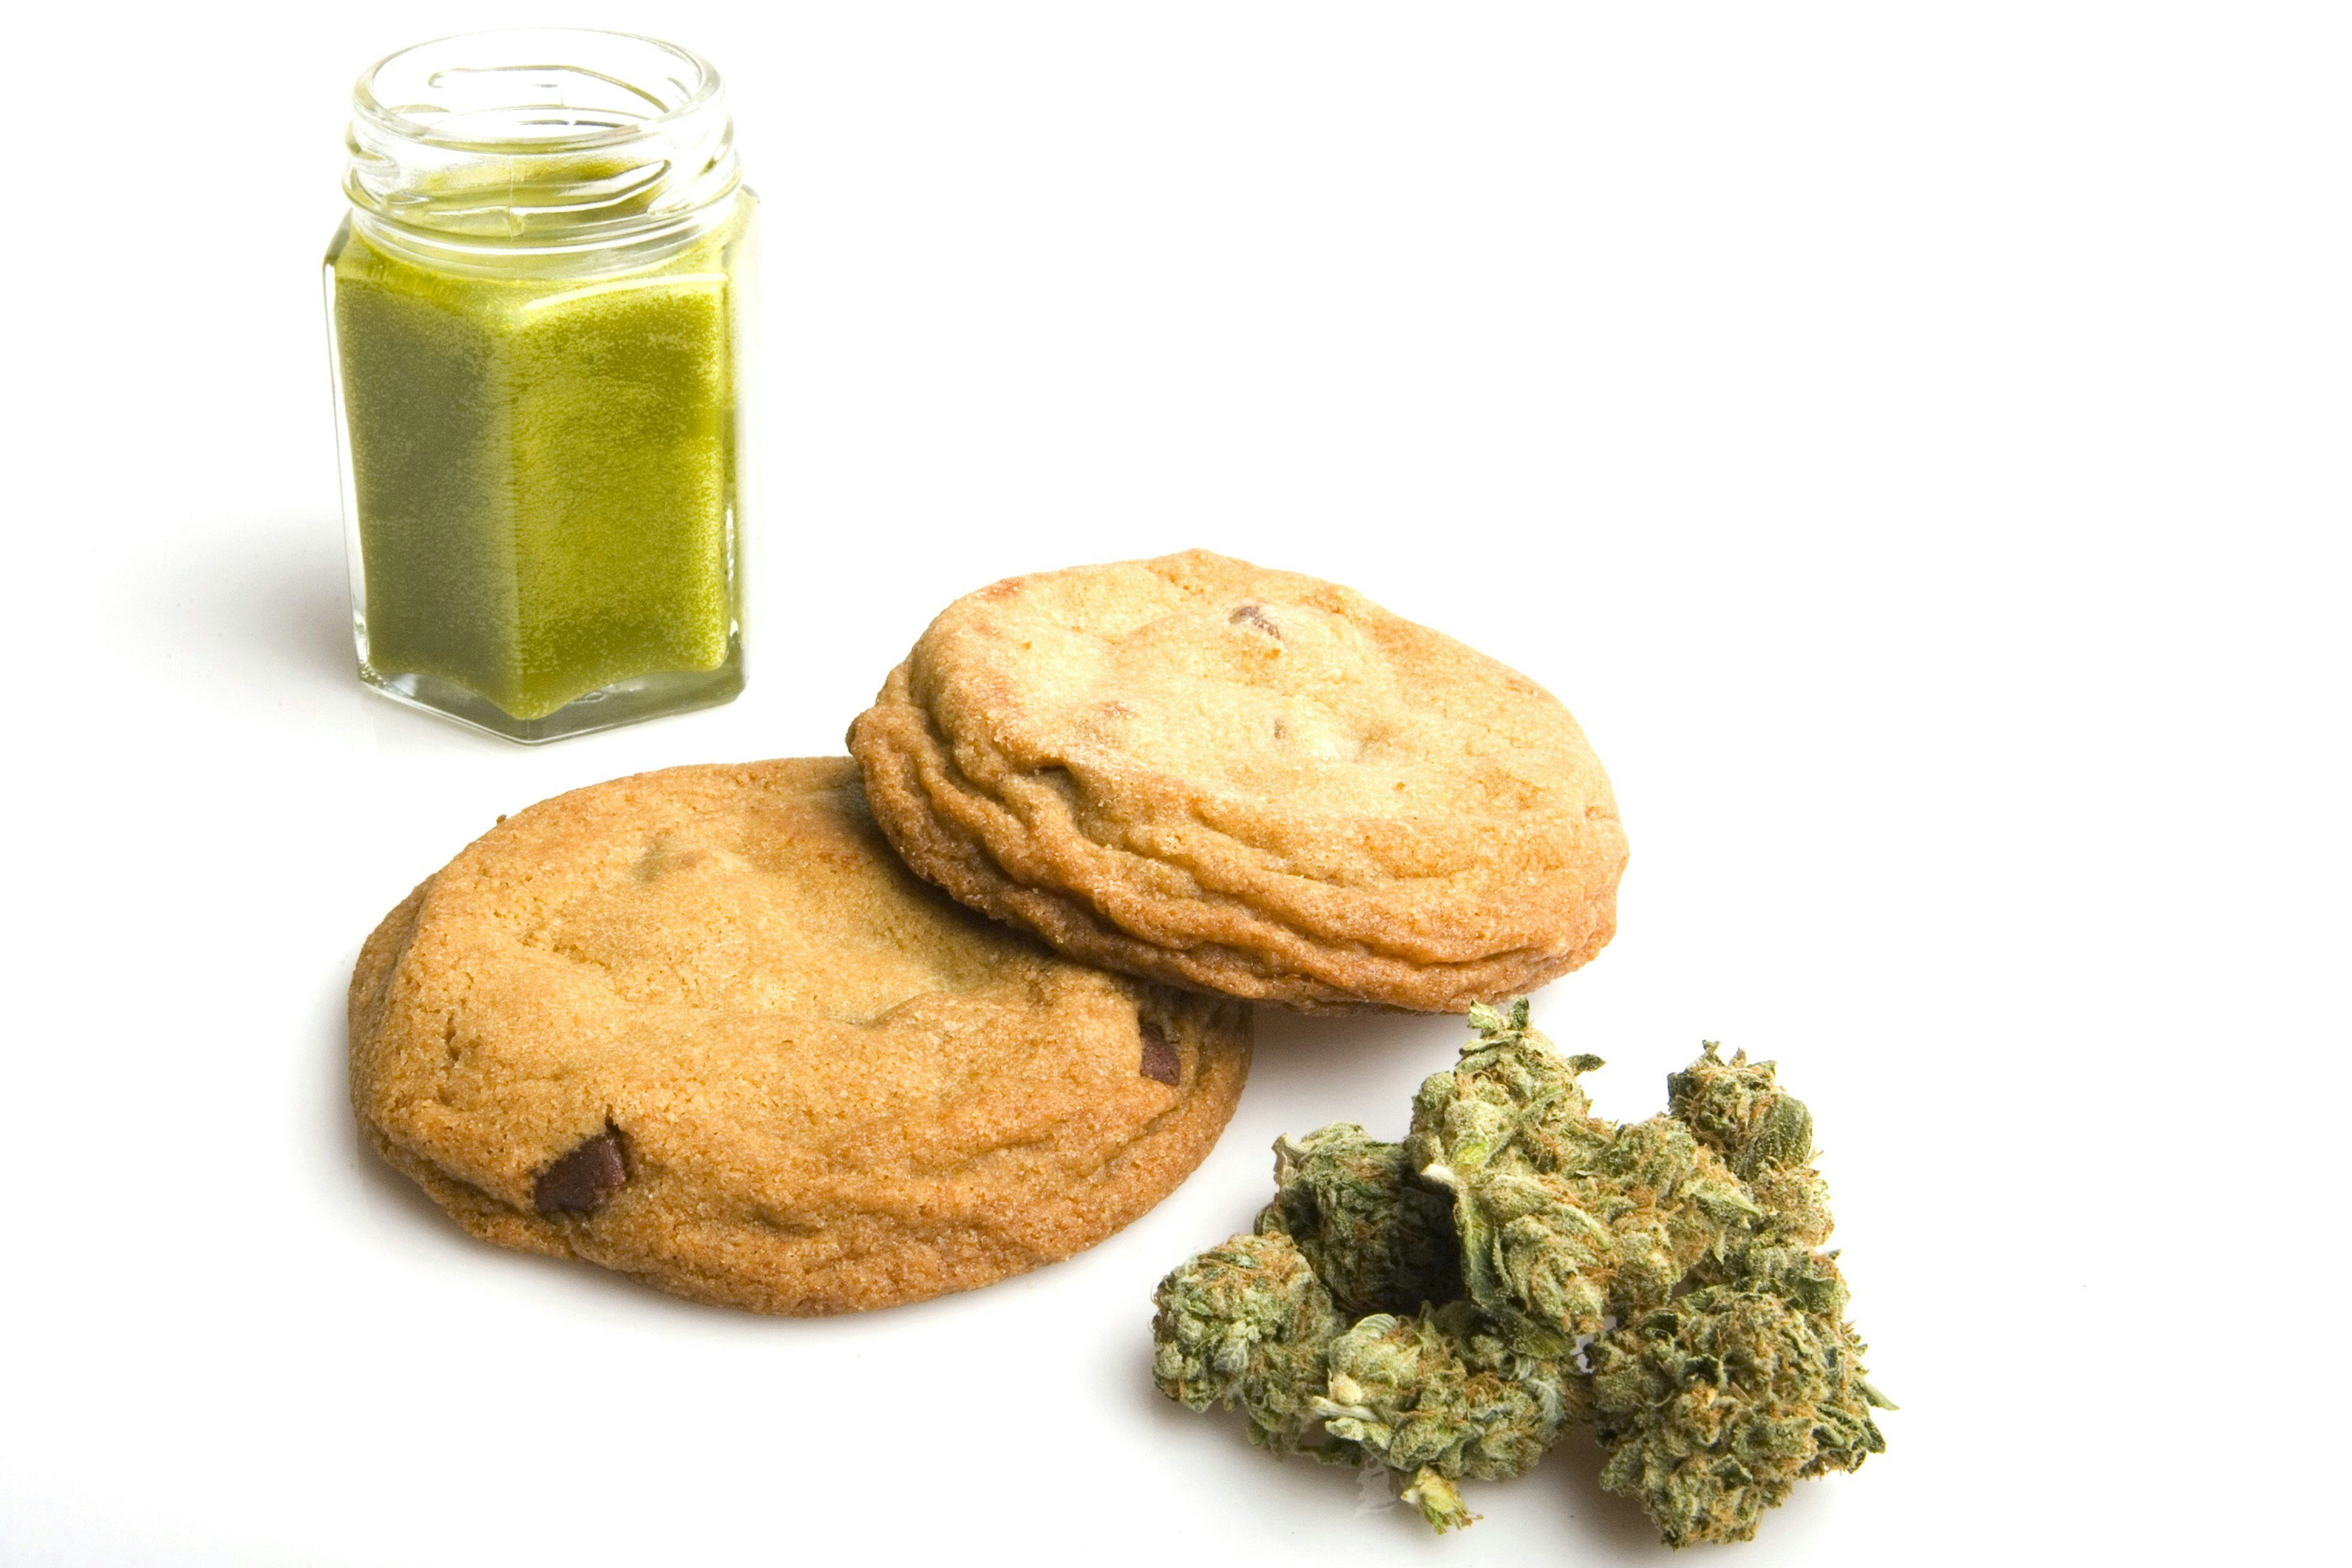 Edibles 1 Almost Half of The Population of Canada Wants to Try Weed Edibles